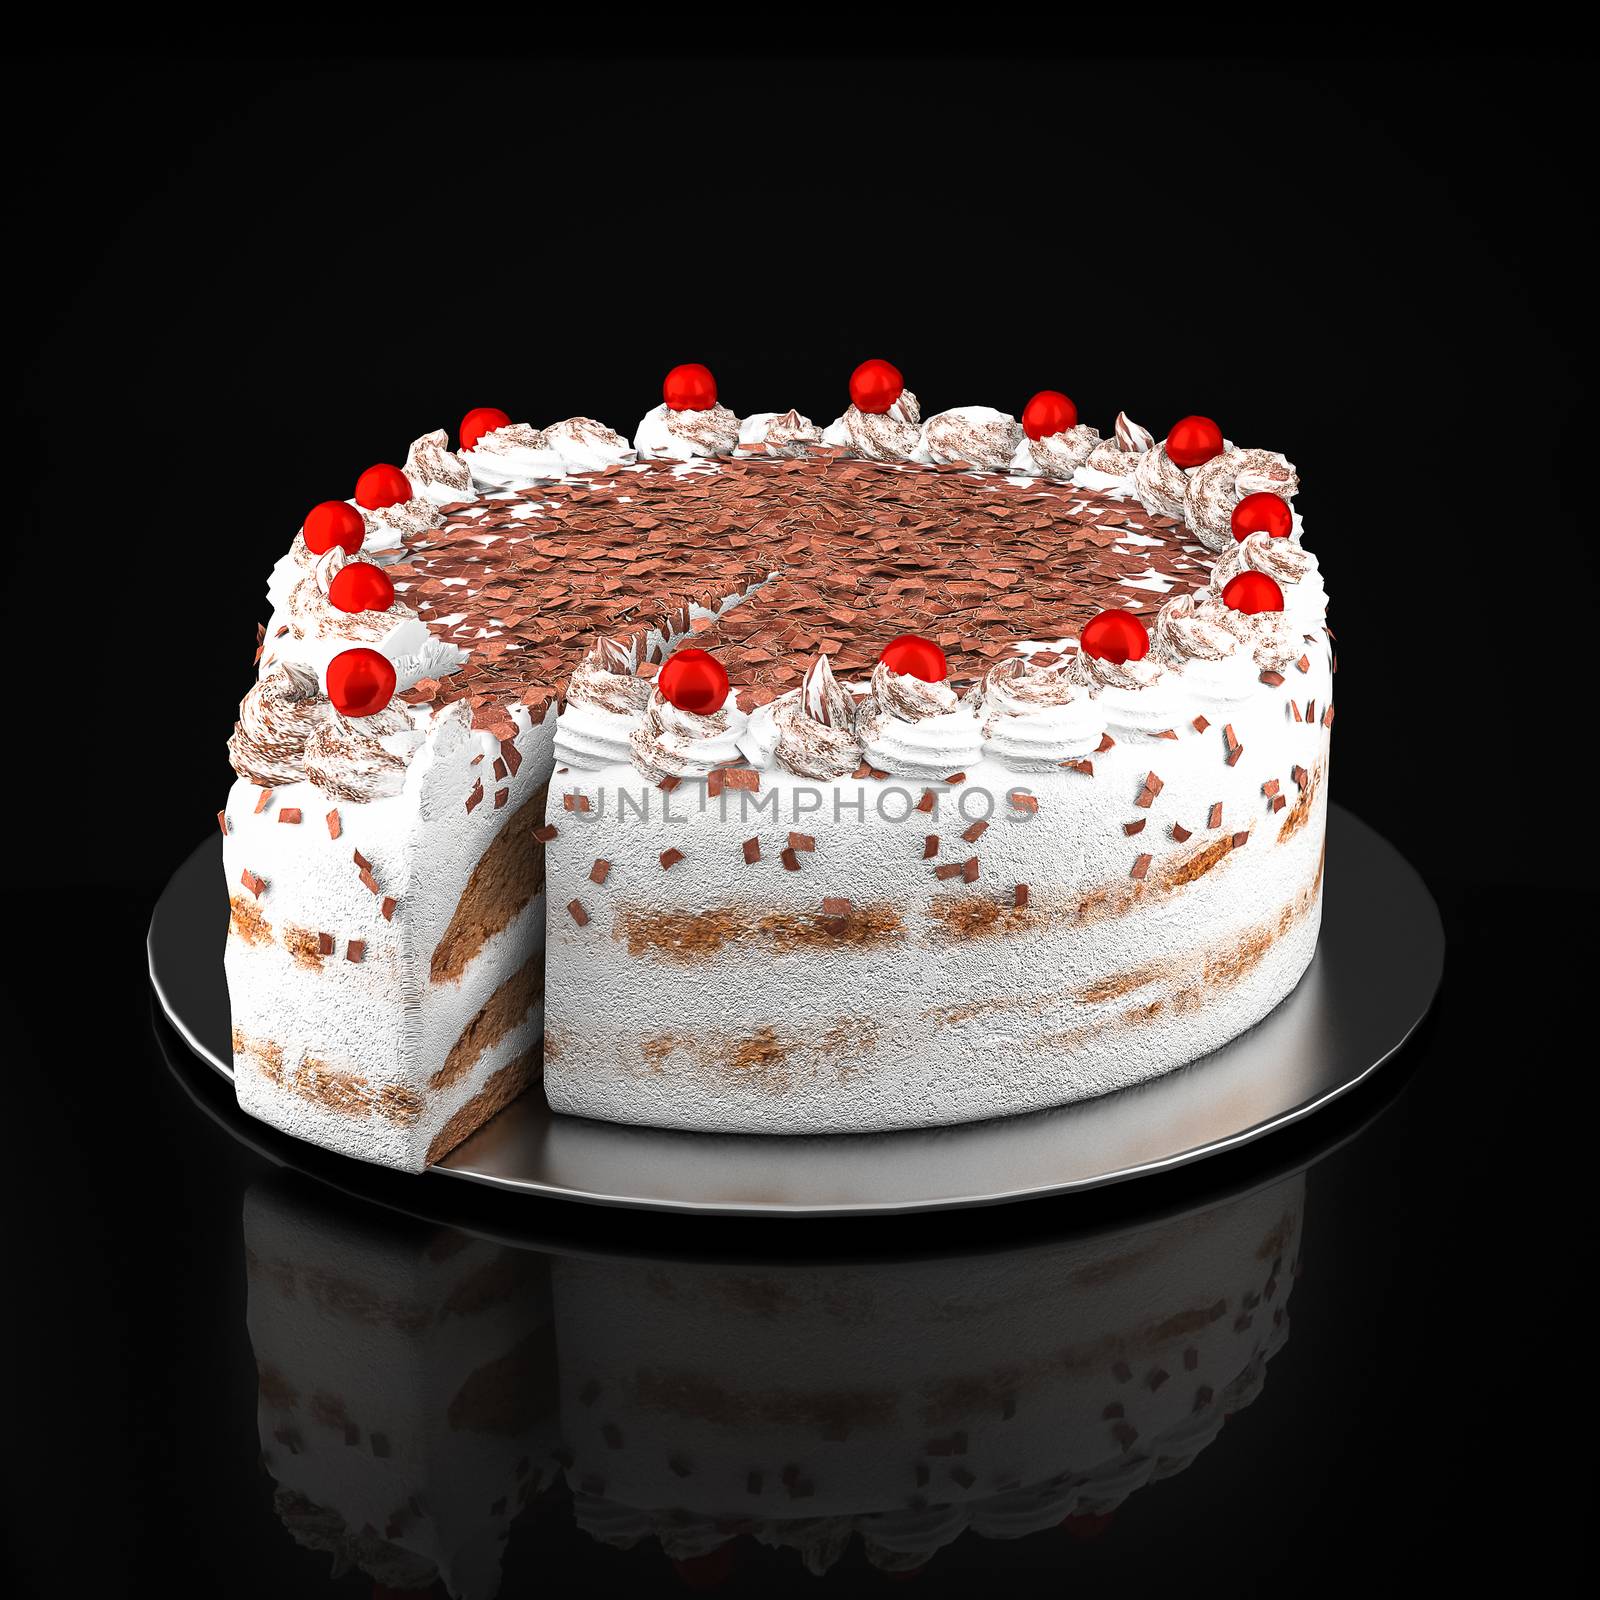 Cake with chocolate chips by mrgarry